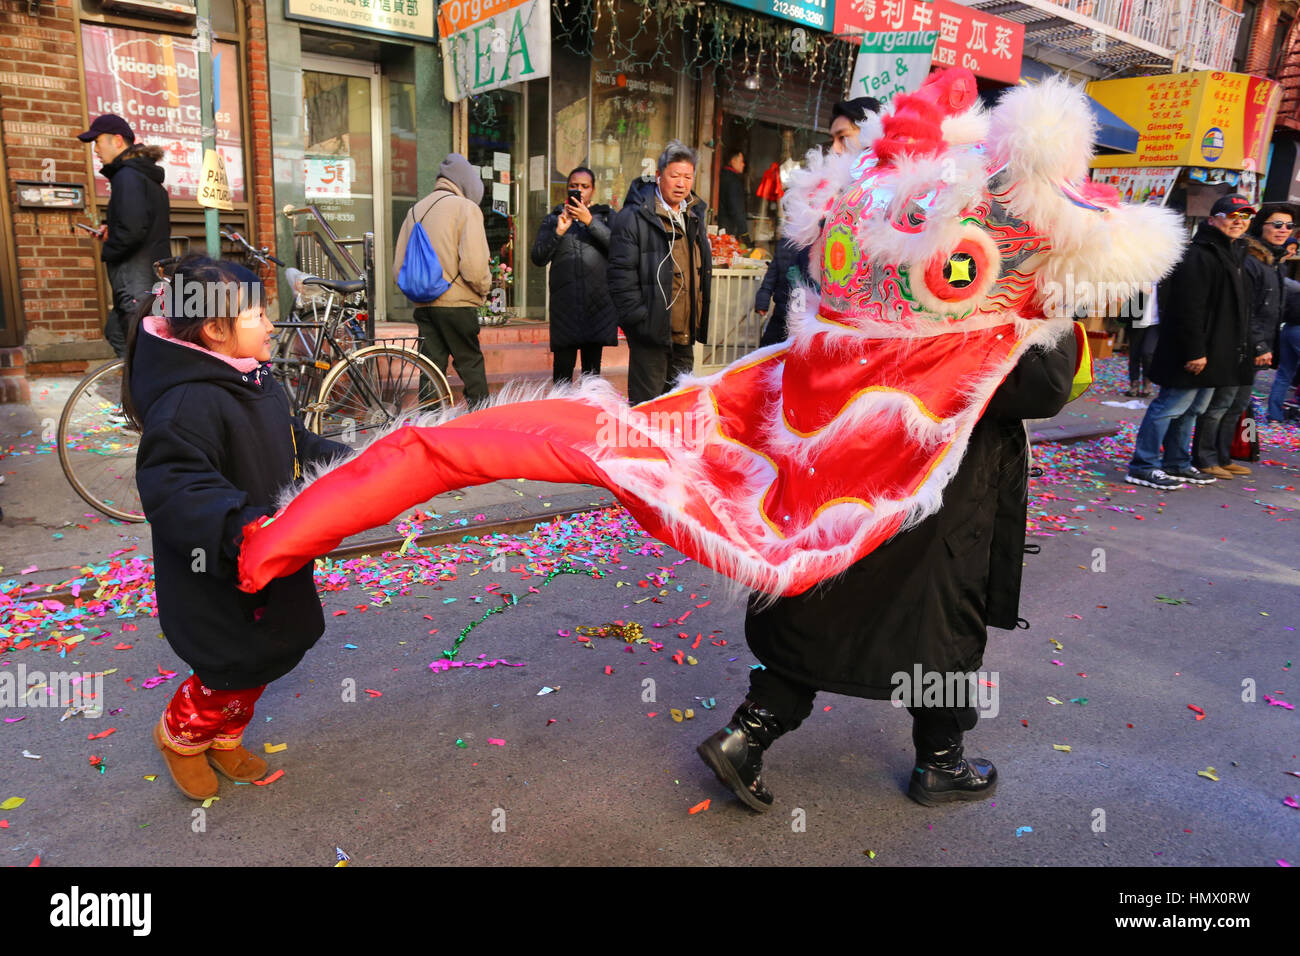 New York, USA. 04th Feb, 2017. New York Chinatown celebrating the Lunar New Year, Year of the Rooster with Lion Dances, Dragon dances, and a big parade. Credit: Robert K. Chin/Pacific Press/Alamy Live News Stock Photo